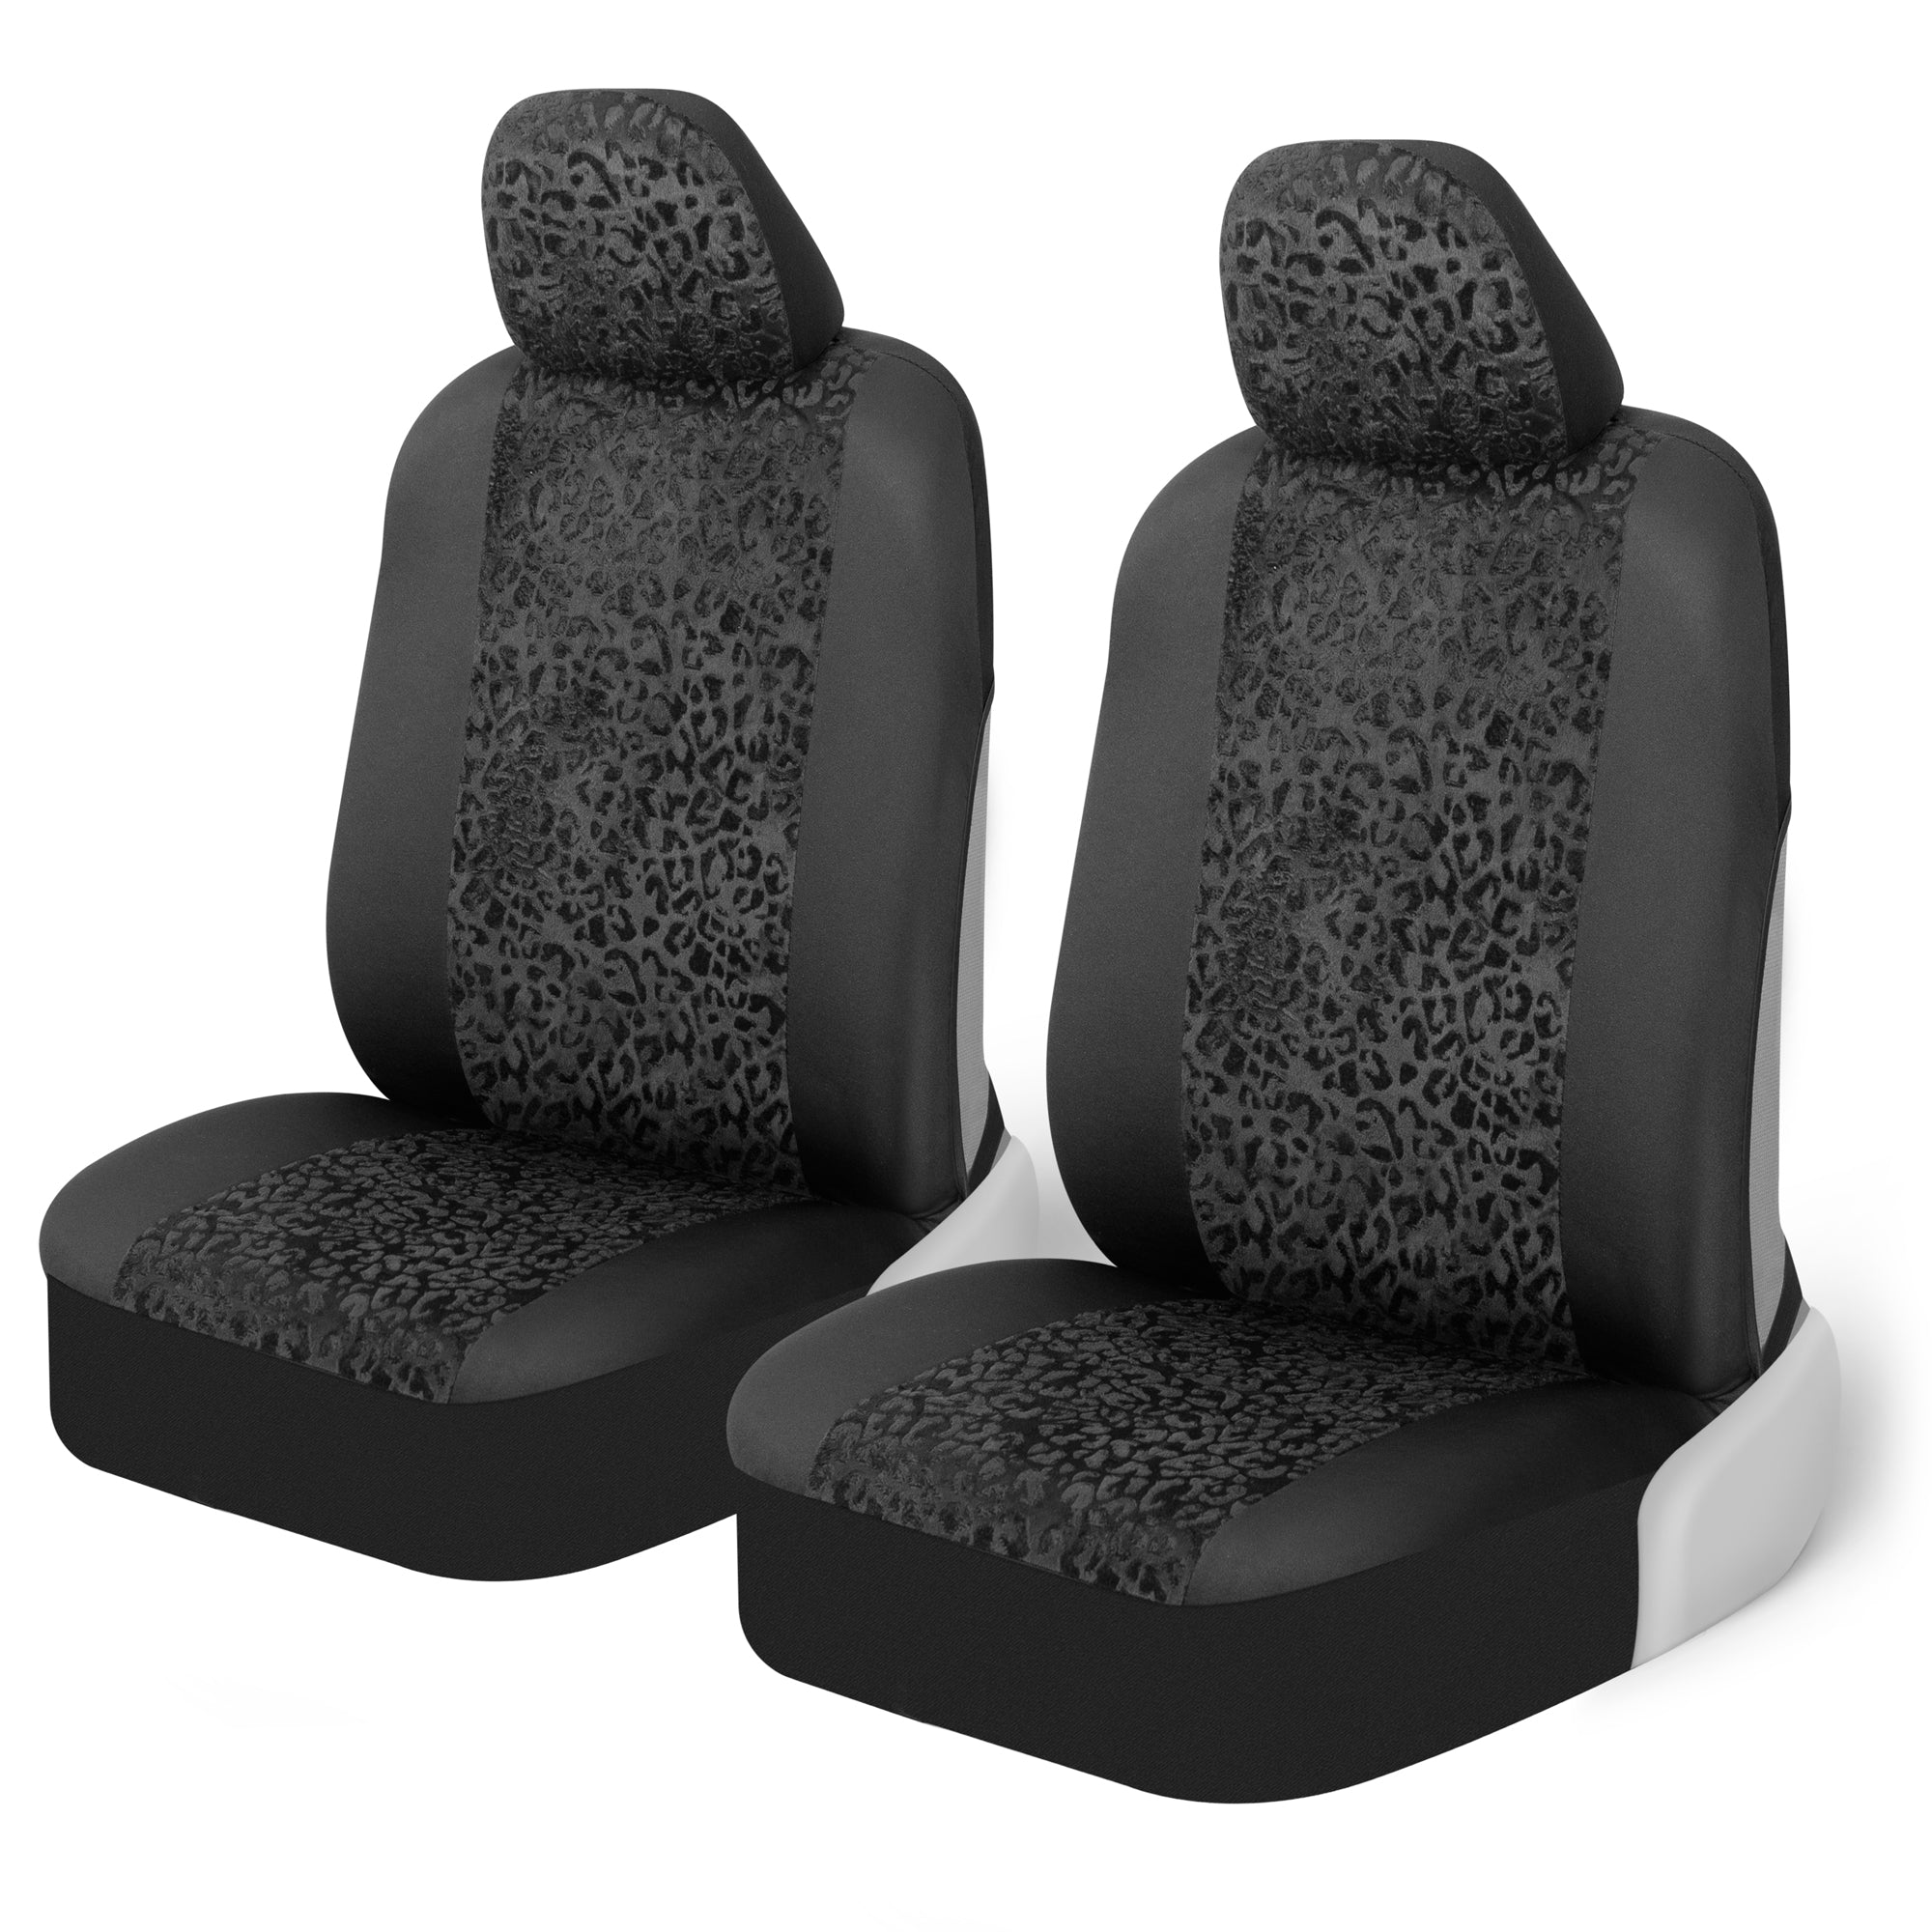 BDK Black Leopard Car Seat Covers for Front Seats, 2 Pack – Animal Print Front Seat Cover Set with Matching Headrest, Sideless Design for Easy Installation, Fits Most Car Truck Van and SUV